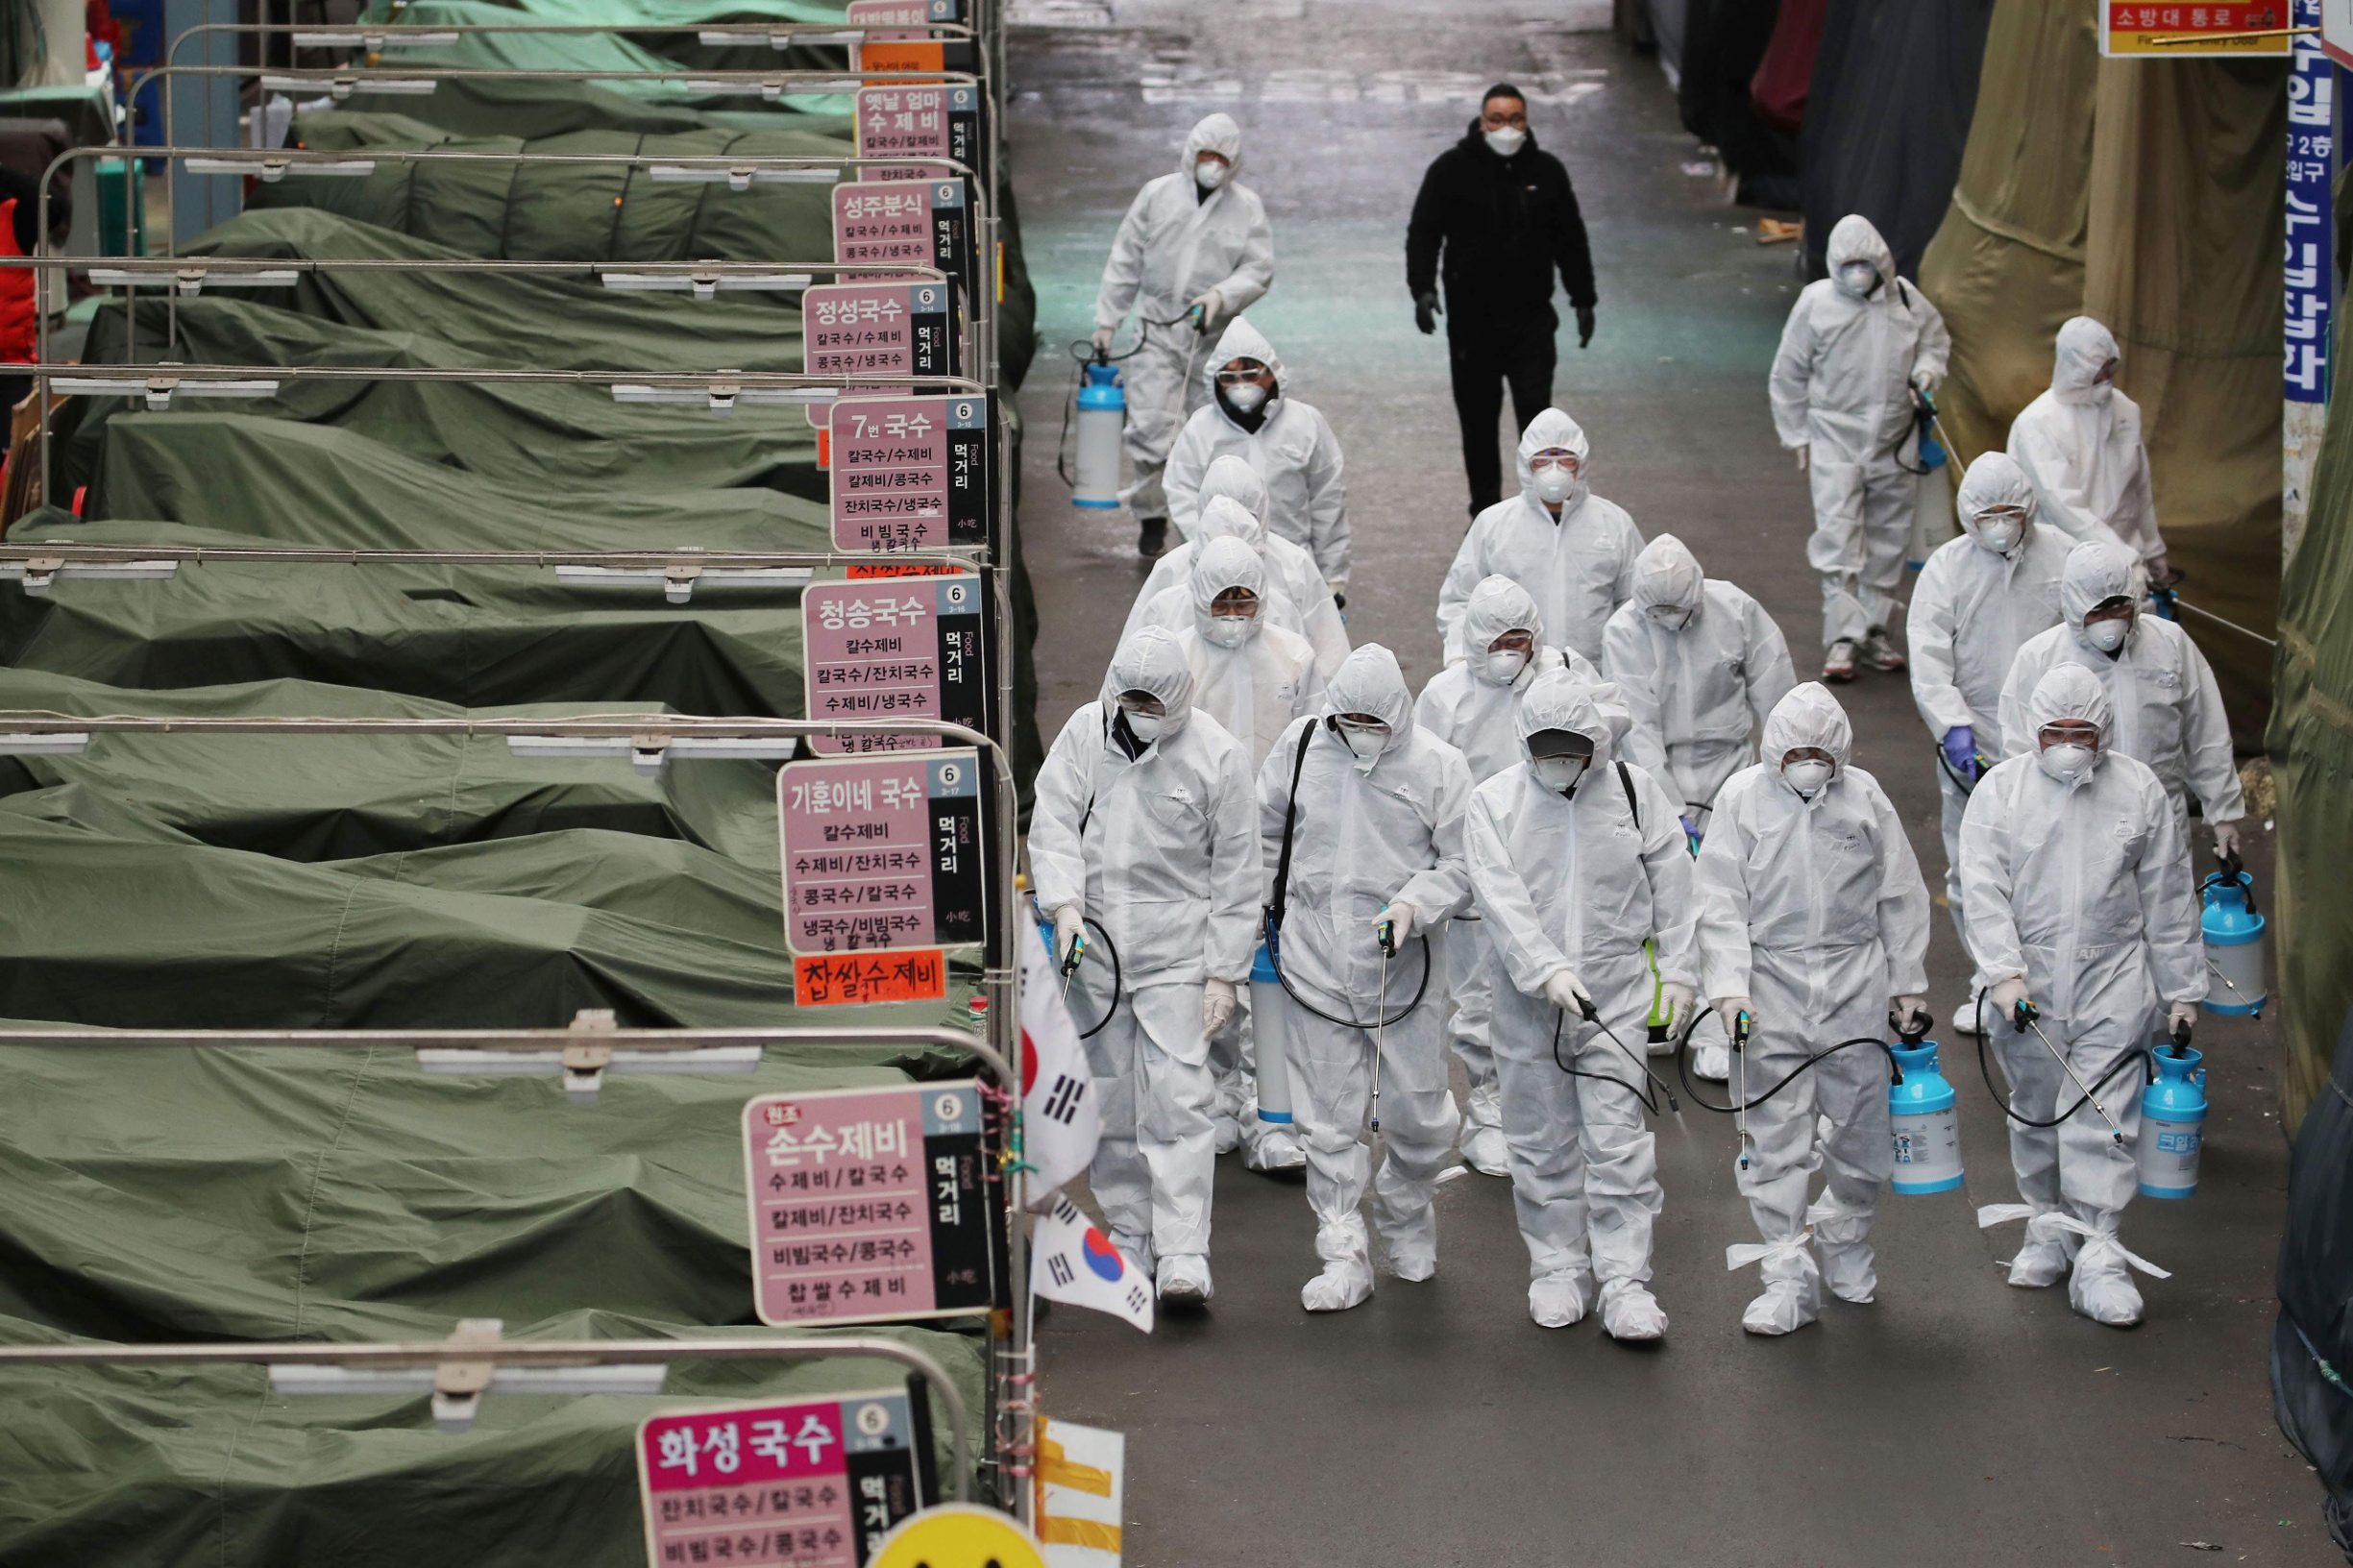 Market workers wearing protective gear spray disinfectant at a market in the southeastern city of Daegu on February 23, 2020 as a preventive measure after the COVID-19 coronavirus outbreak. - South Korea reported two additional deaths from coronavirus and 123 more cases on February 23, with nearly two thirds of the new patients connected to a religious sect. The national toll of 556 cases is now the second-highest outside of China. (Photo by - / YONHAP / AFP) / - South Korea OUT / REPUBLIC OF KOREA OUT  NO ARCHIVES  RESTRICTED TO SUBSCRIPTION USE